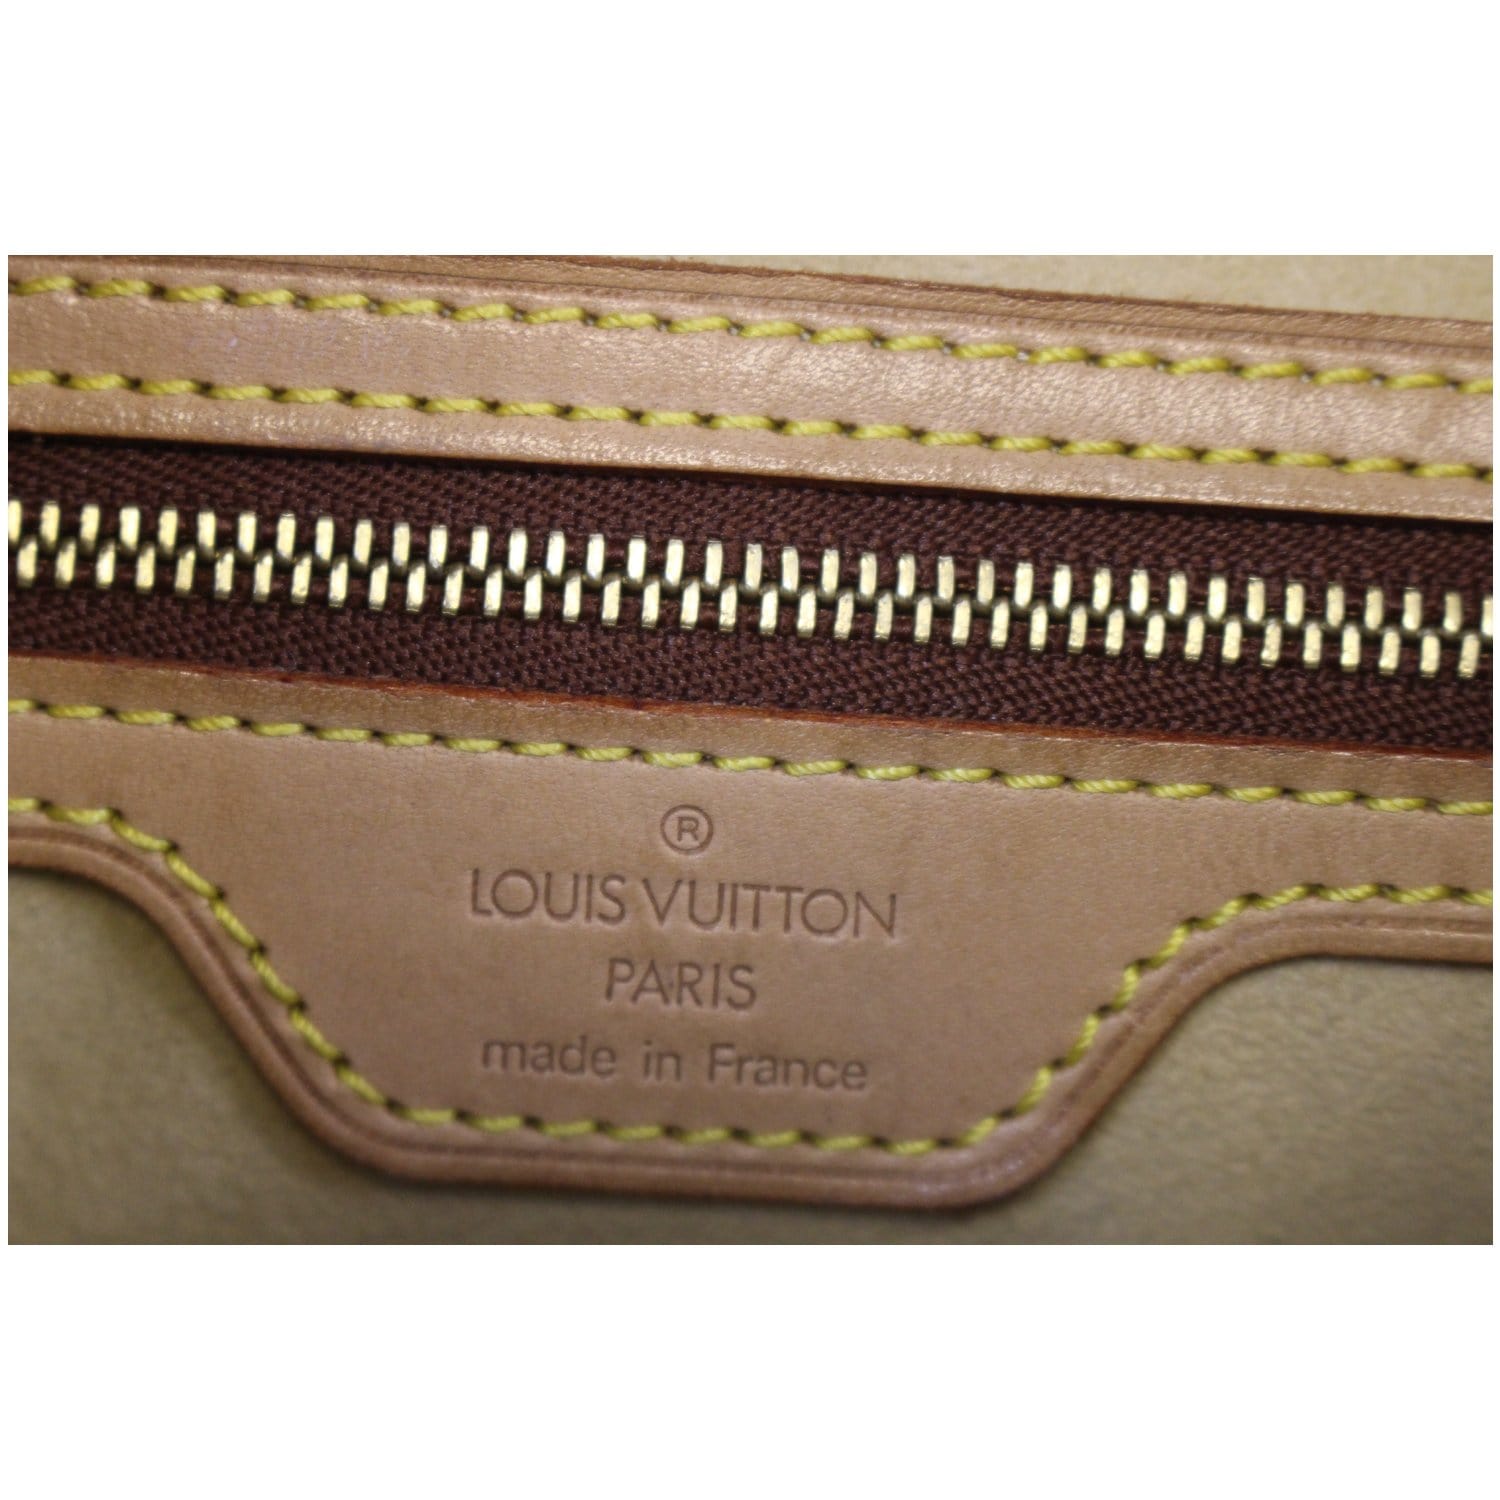 Louis Vuitton, Bags, Authentic Louis Vuitton Looping Gm Monogram Canvas  Shoulder Bag Made In Usa